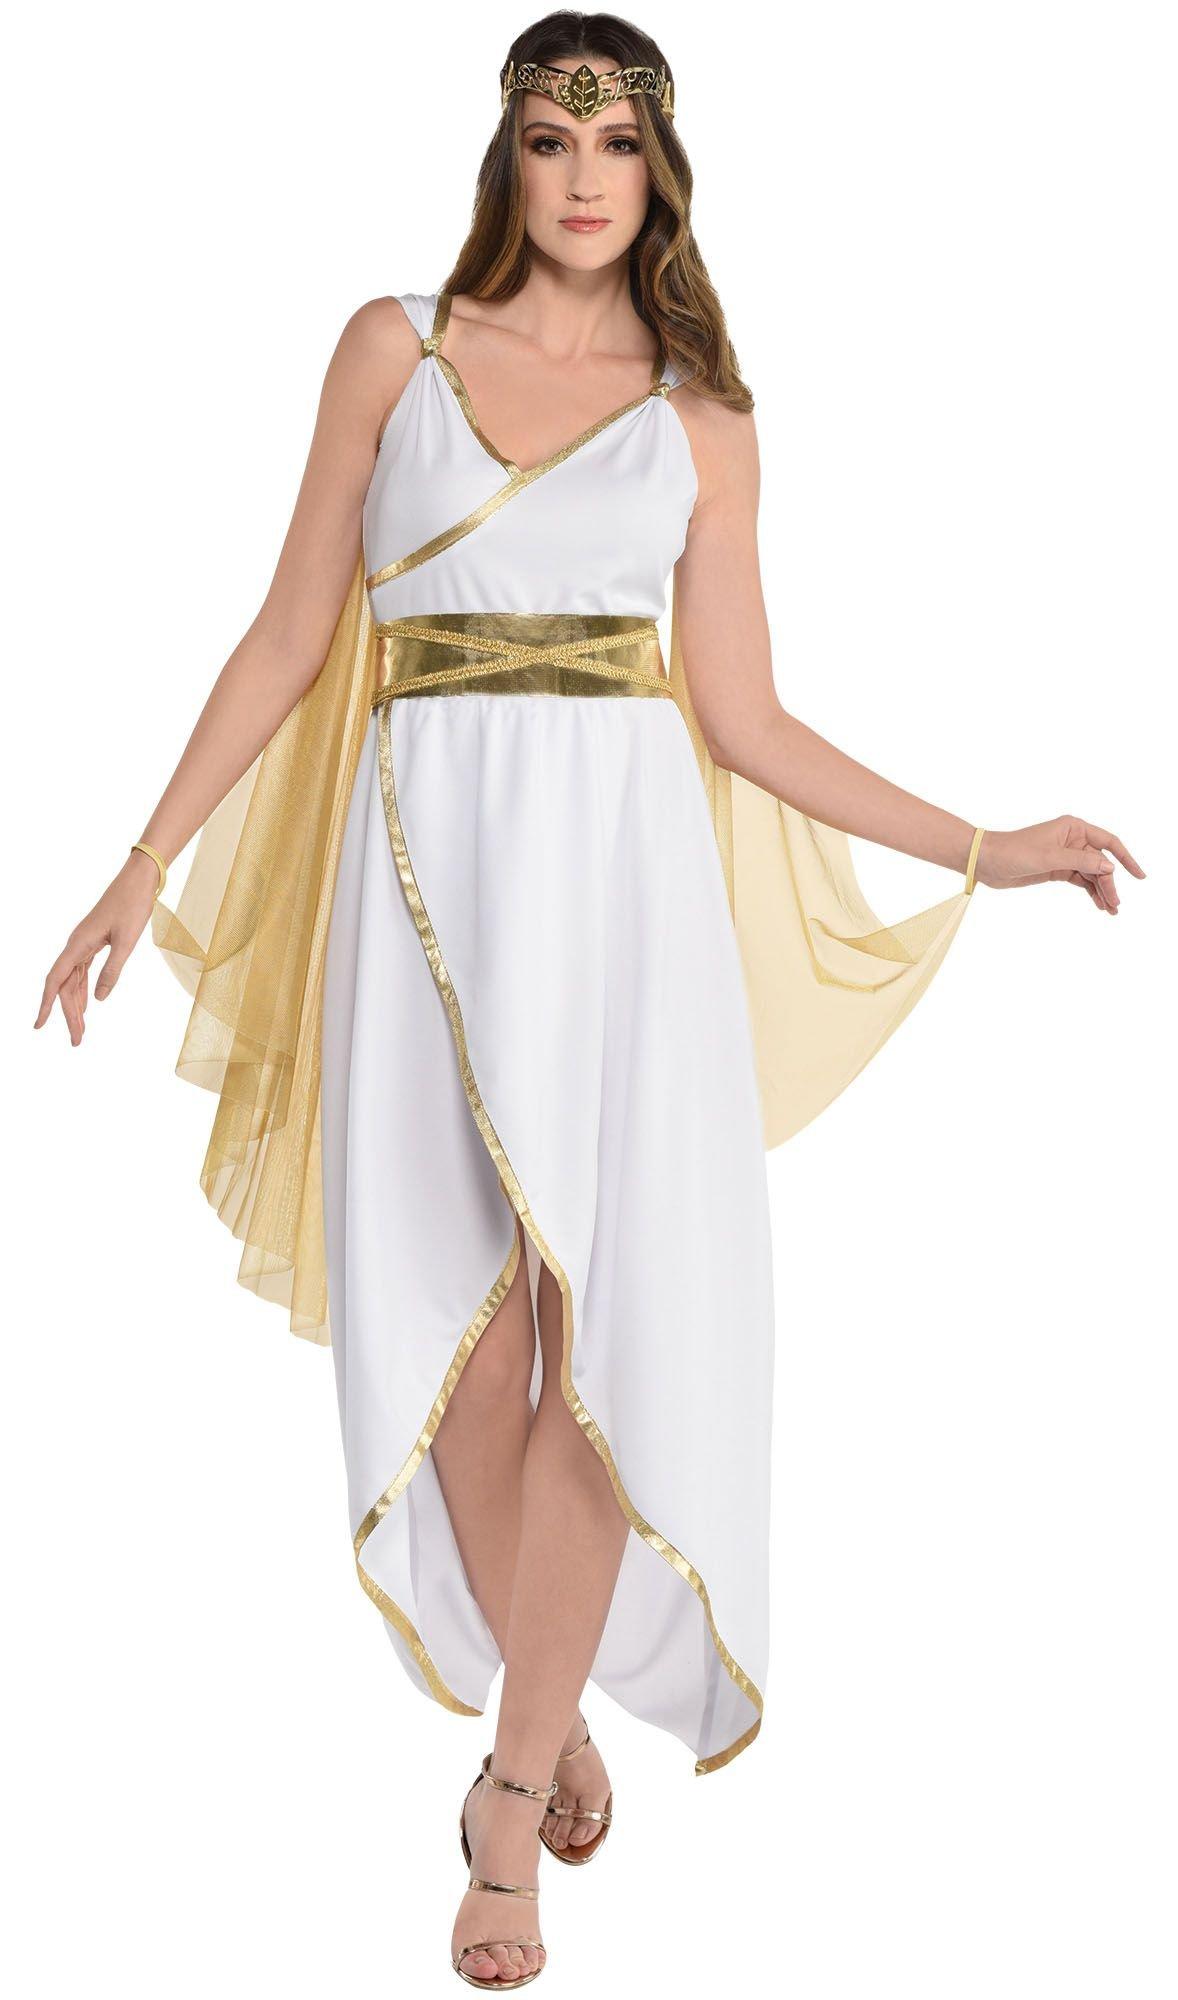 Roman, Egyptian & Greek Goddess Costumes & Accessories | Party City